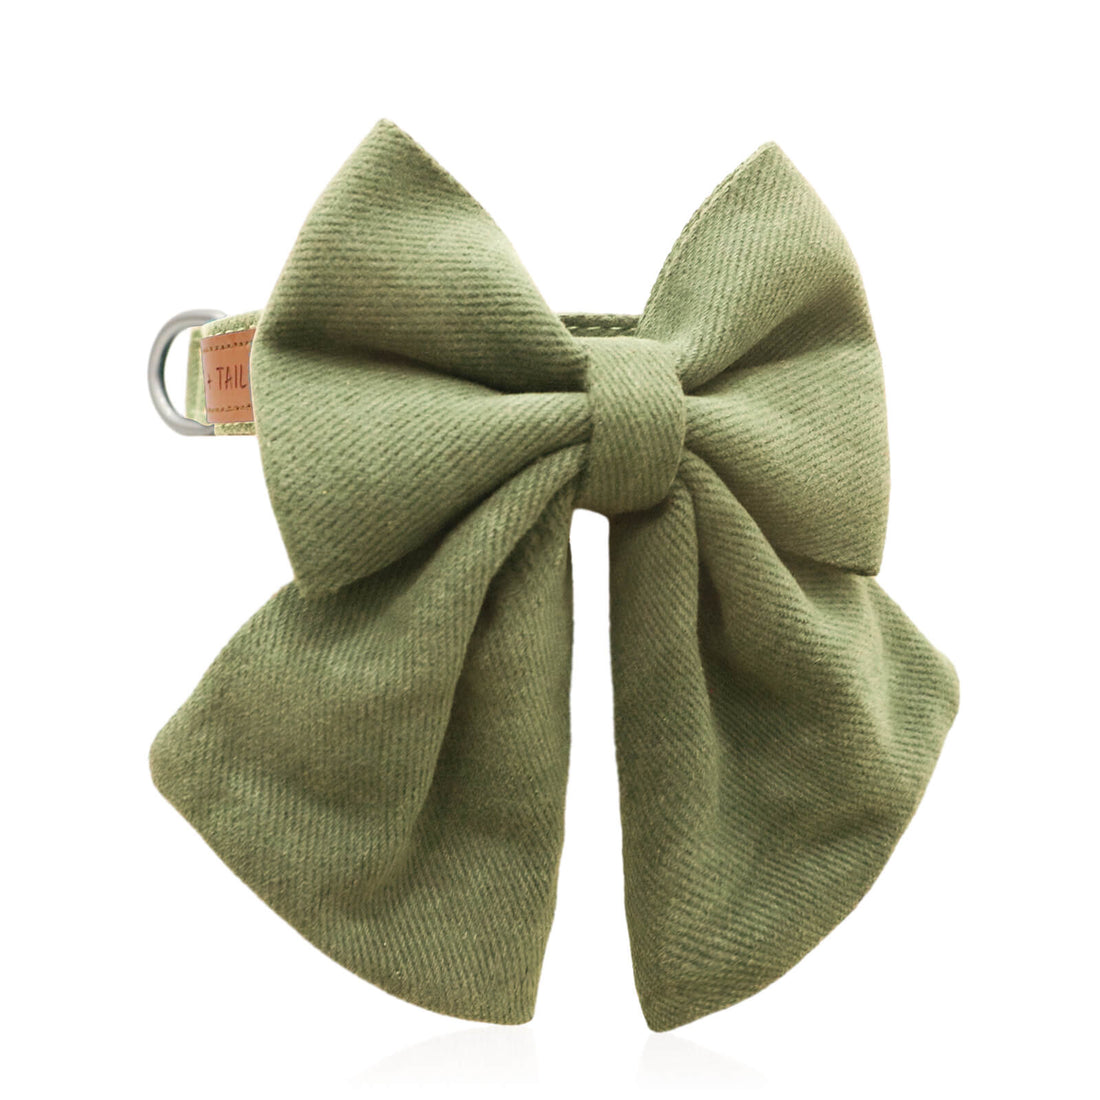 Charming Dog Bowtie Collar for Everyday Wear from Wag + Tail